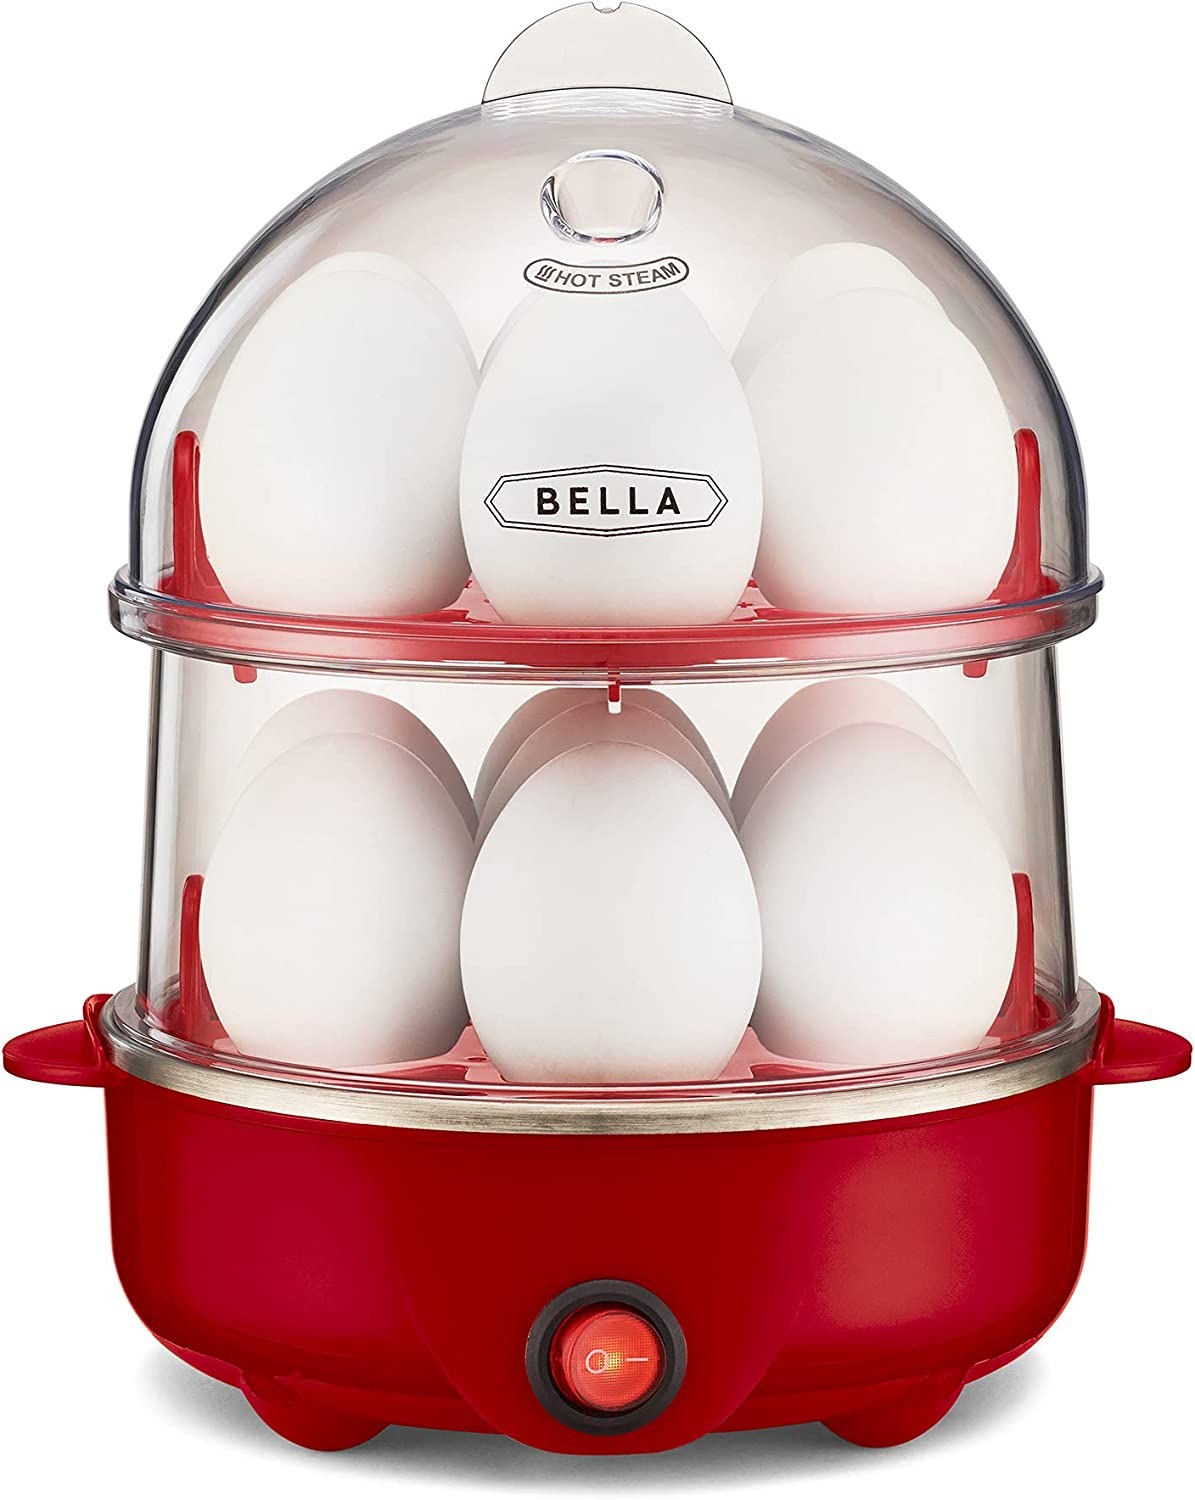 Egg Cookers 9